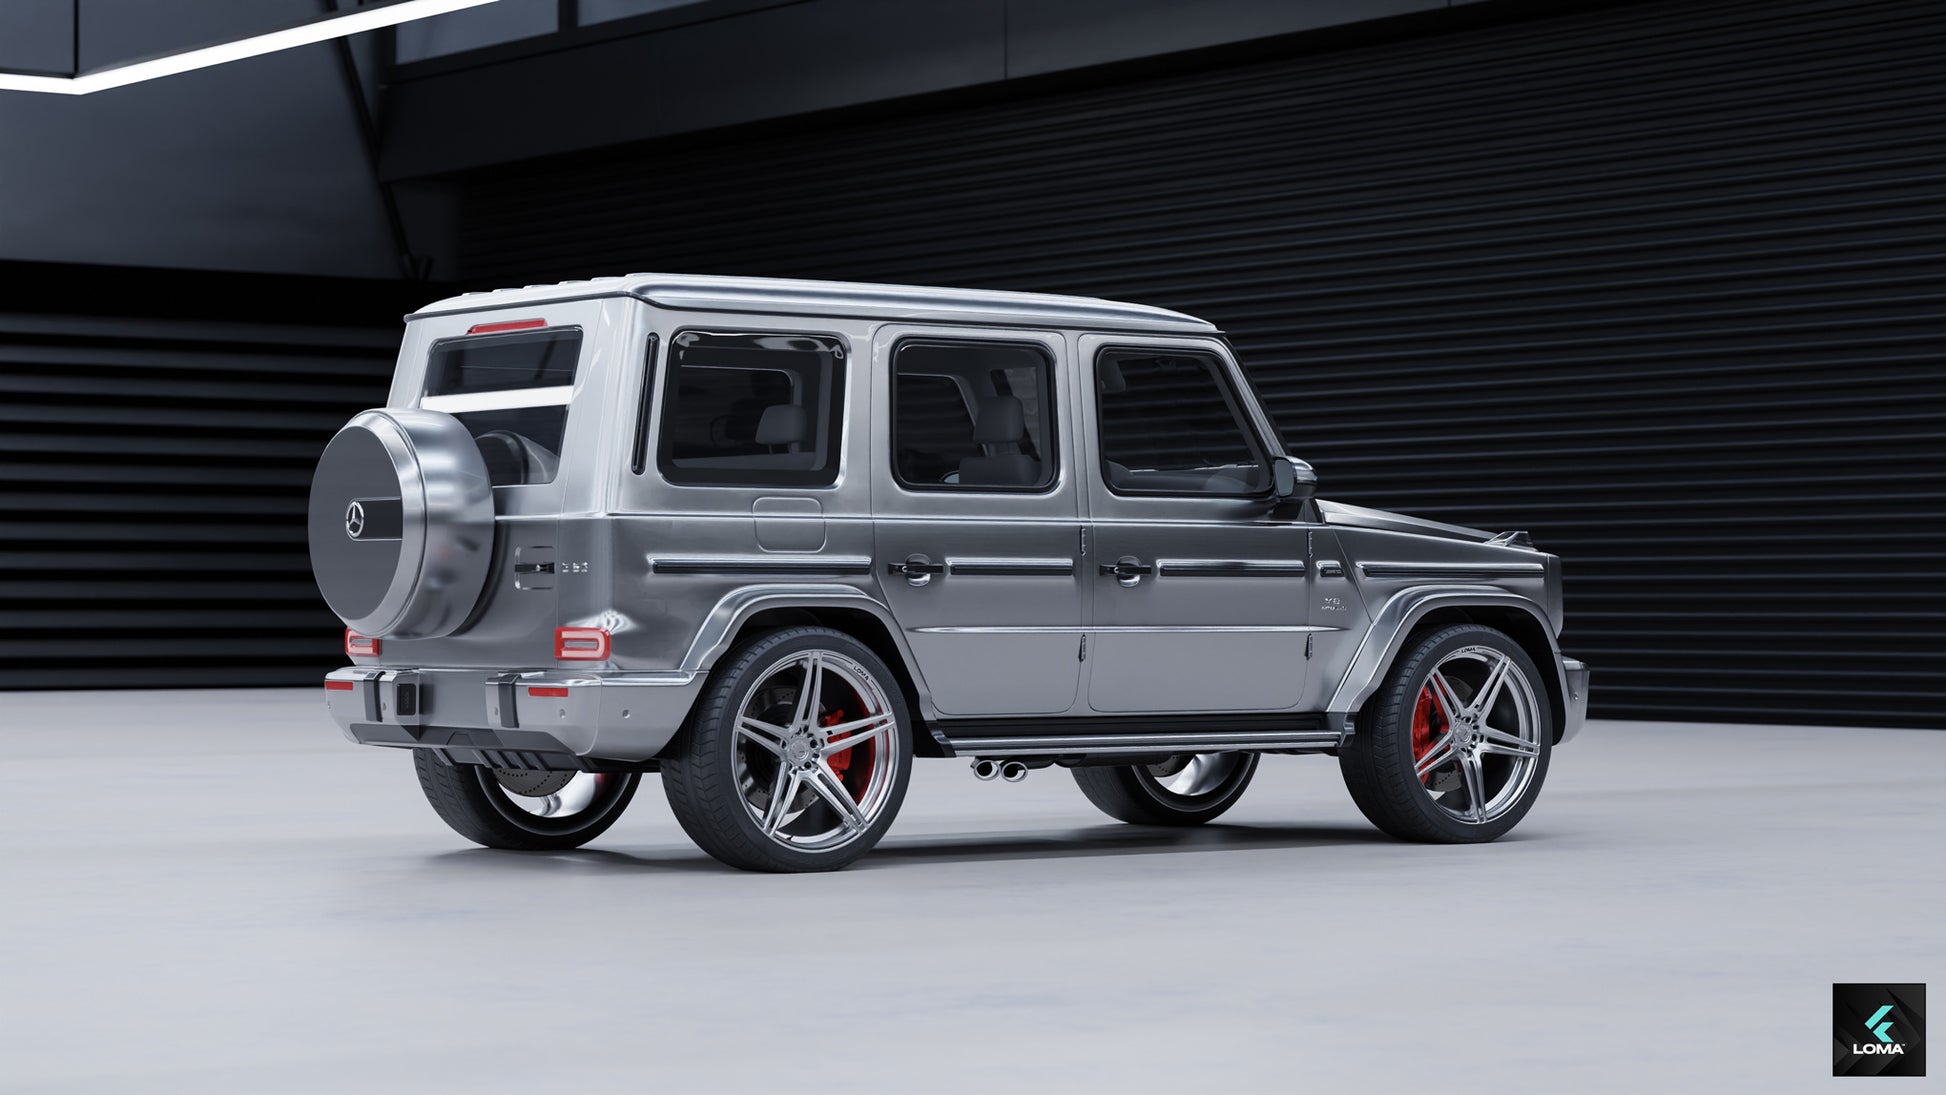 Eye-catching 24-inch deep dish wheels on a high-performance Mercedes G63 AMG, by LOMA Forged™.